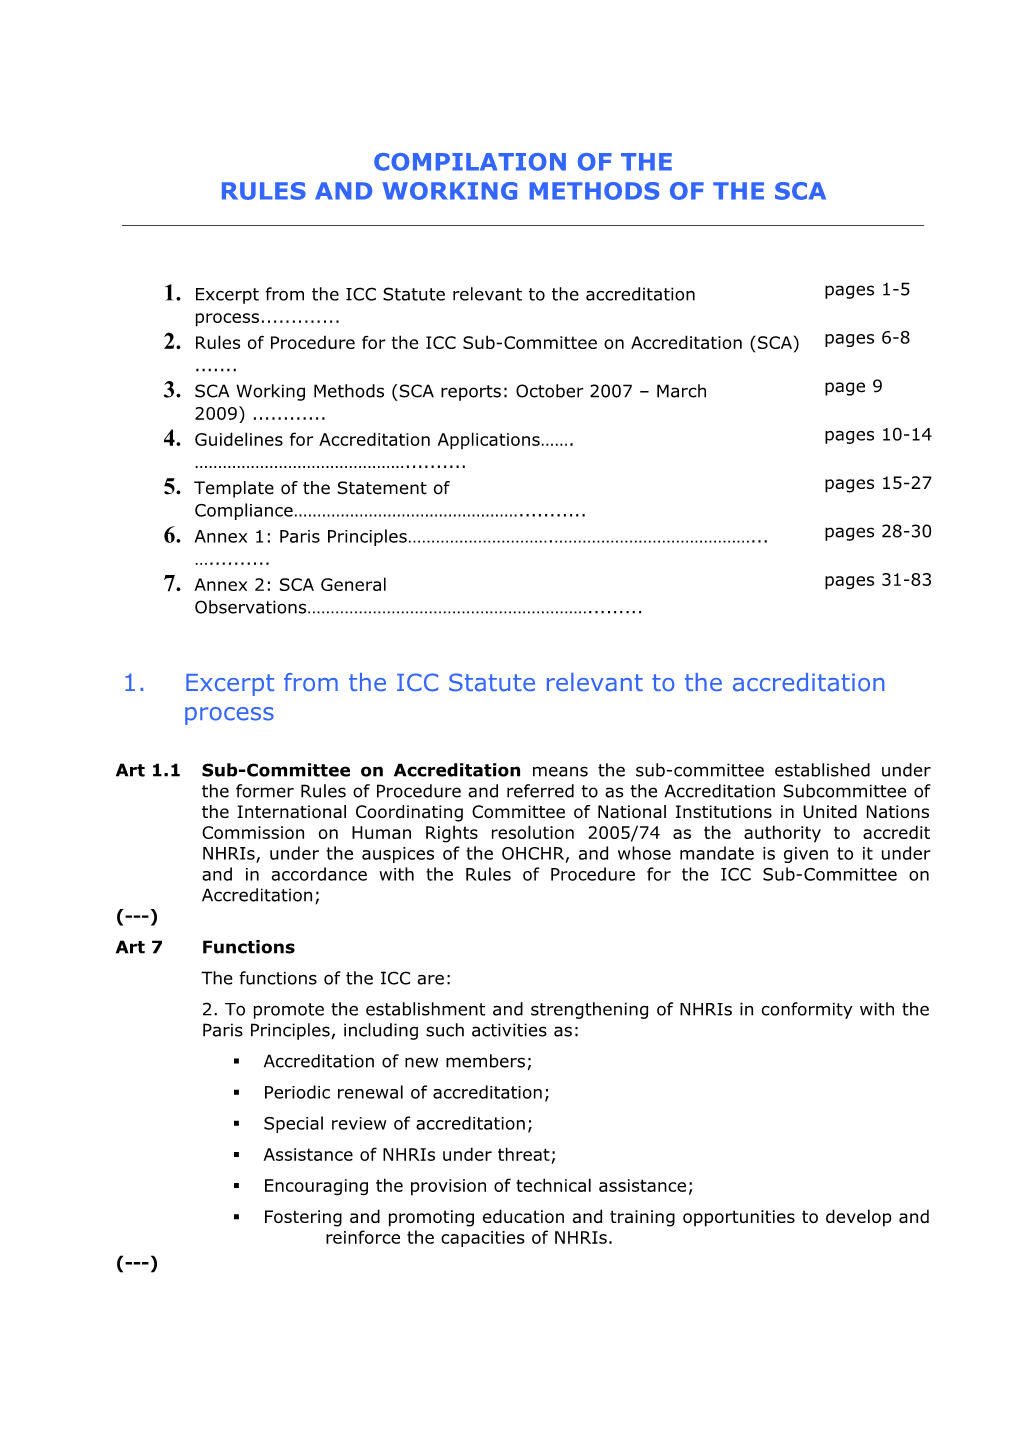 Report and Recommendations of the Sub-Committee on Accreditation